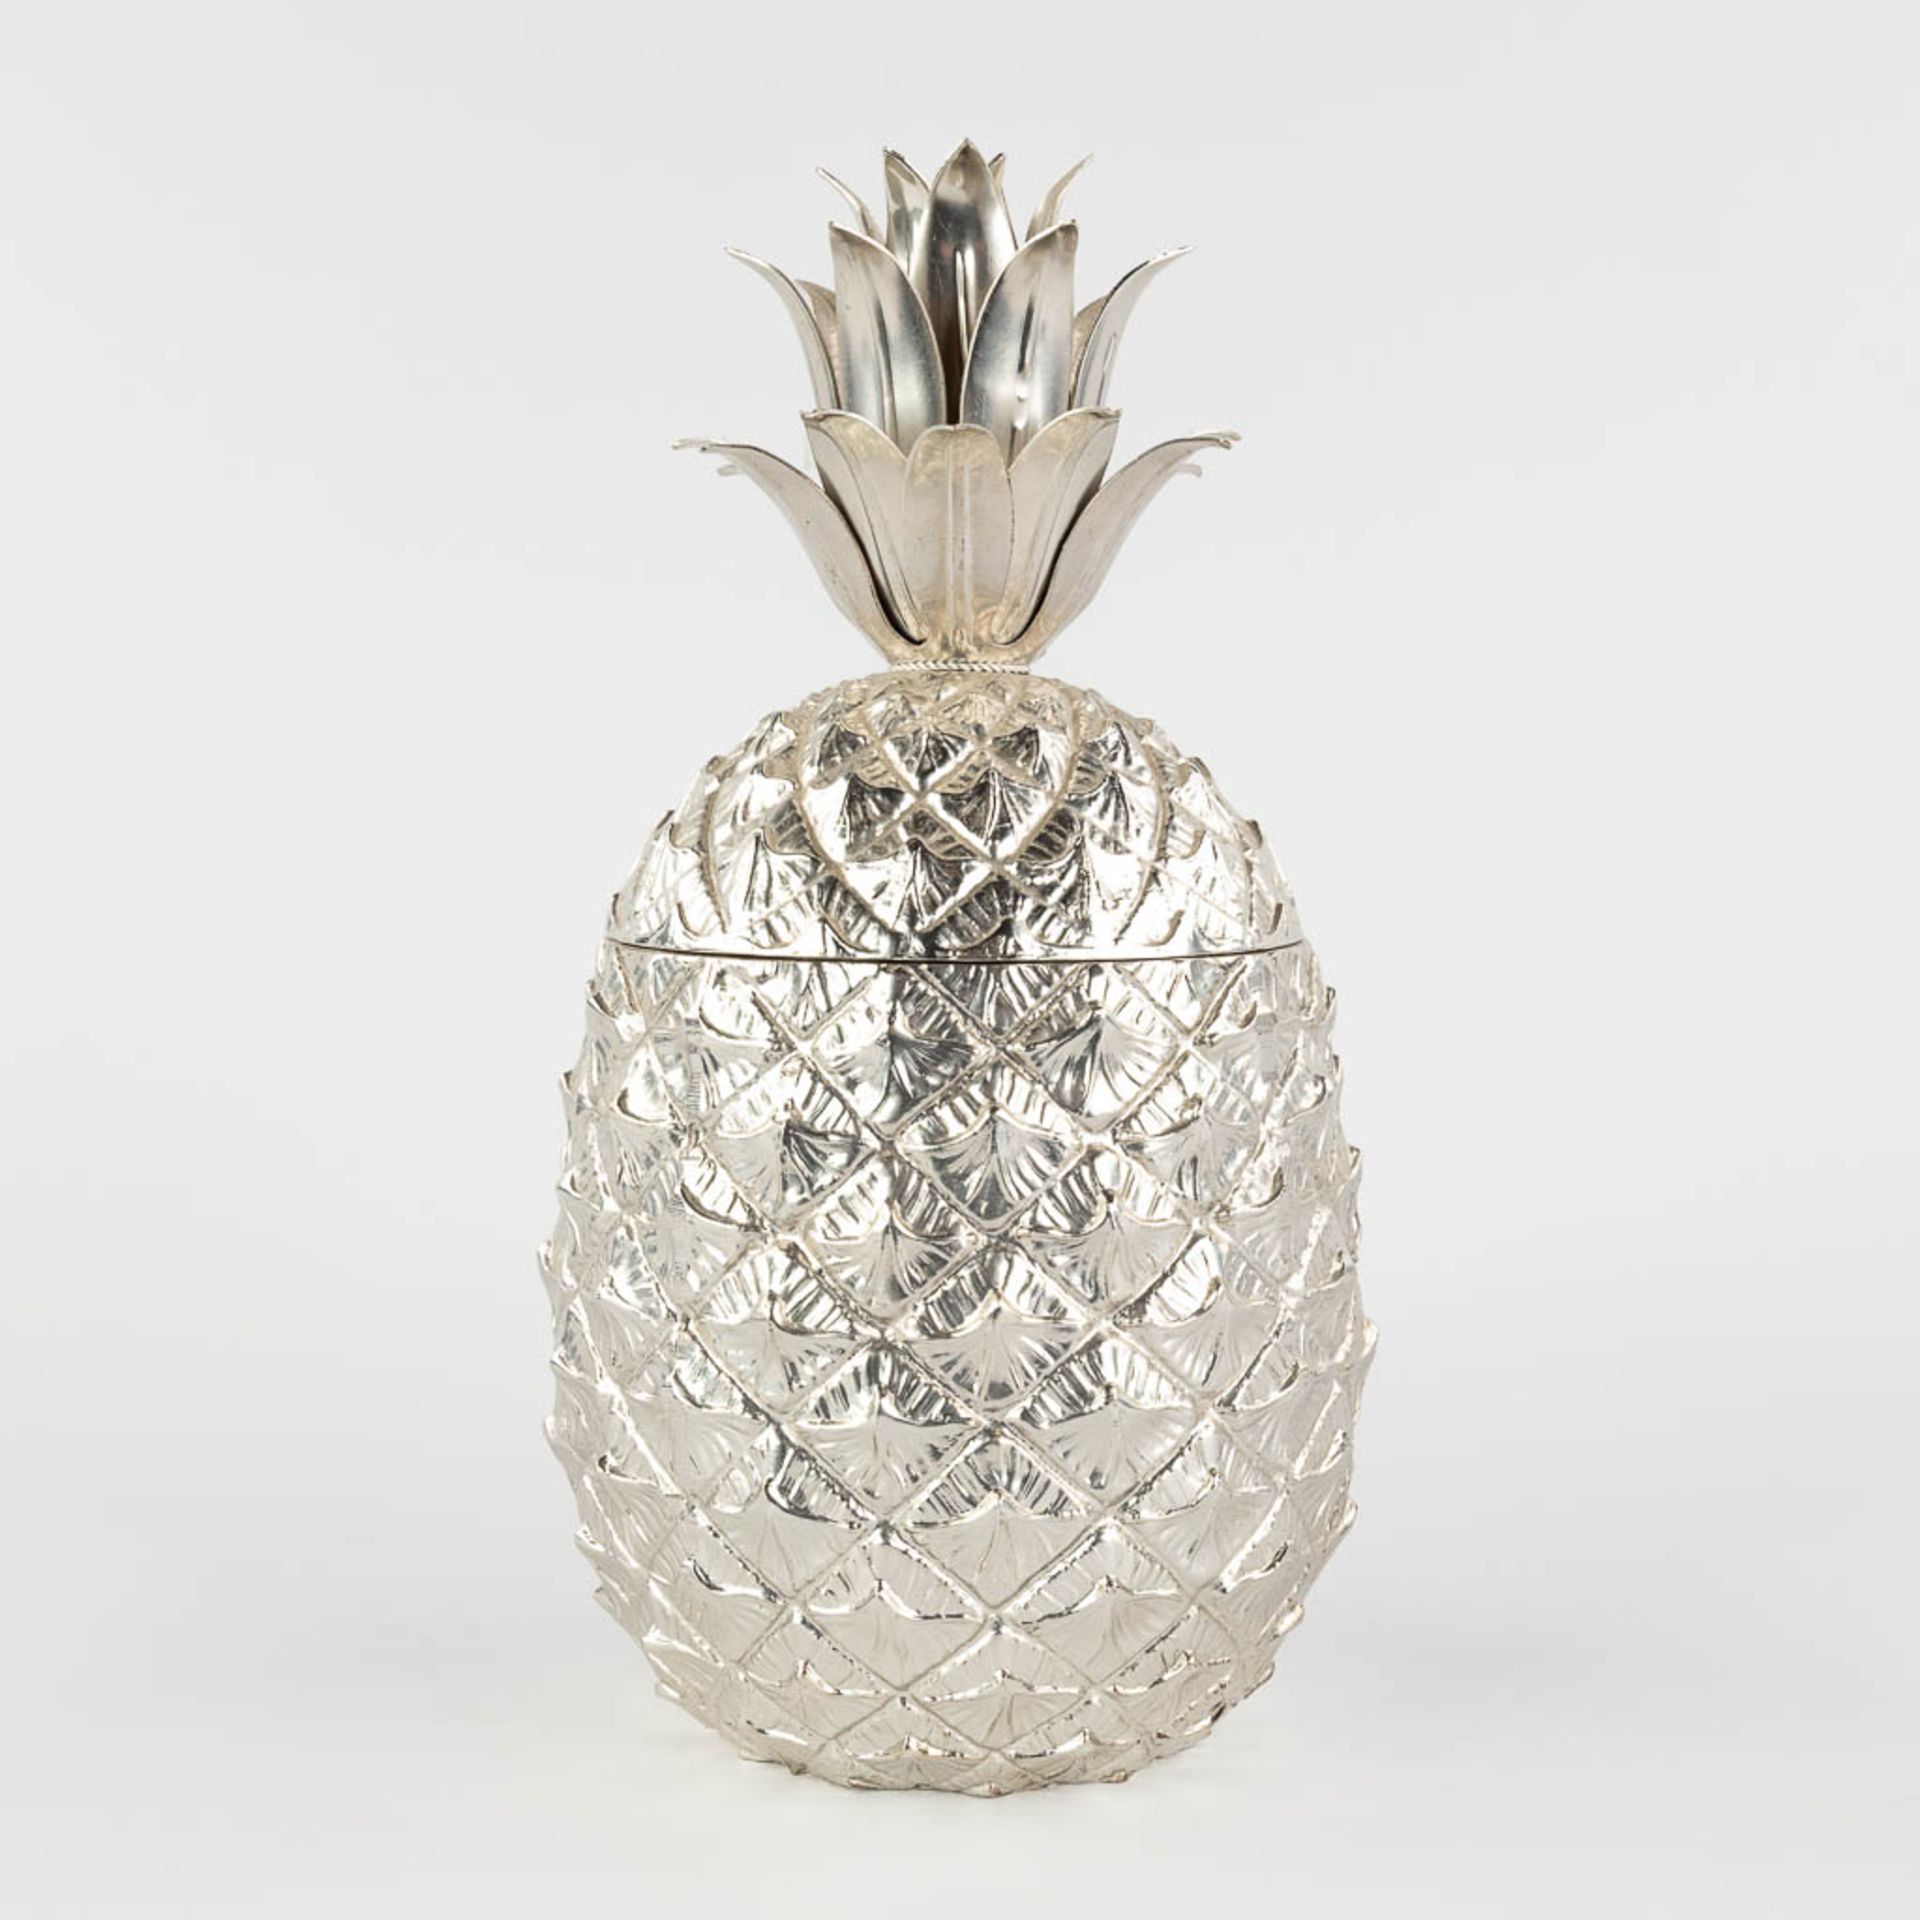 Mauro MANETTI (XX) 'Pineapple' an ice pail. (H:26 x D:14 cm) - Image 5 of 13